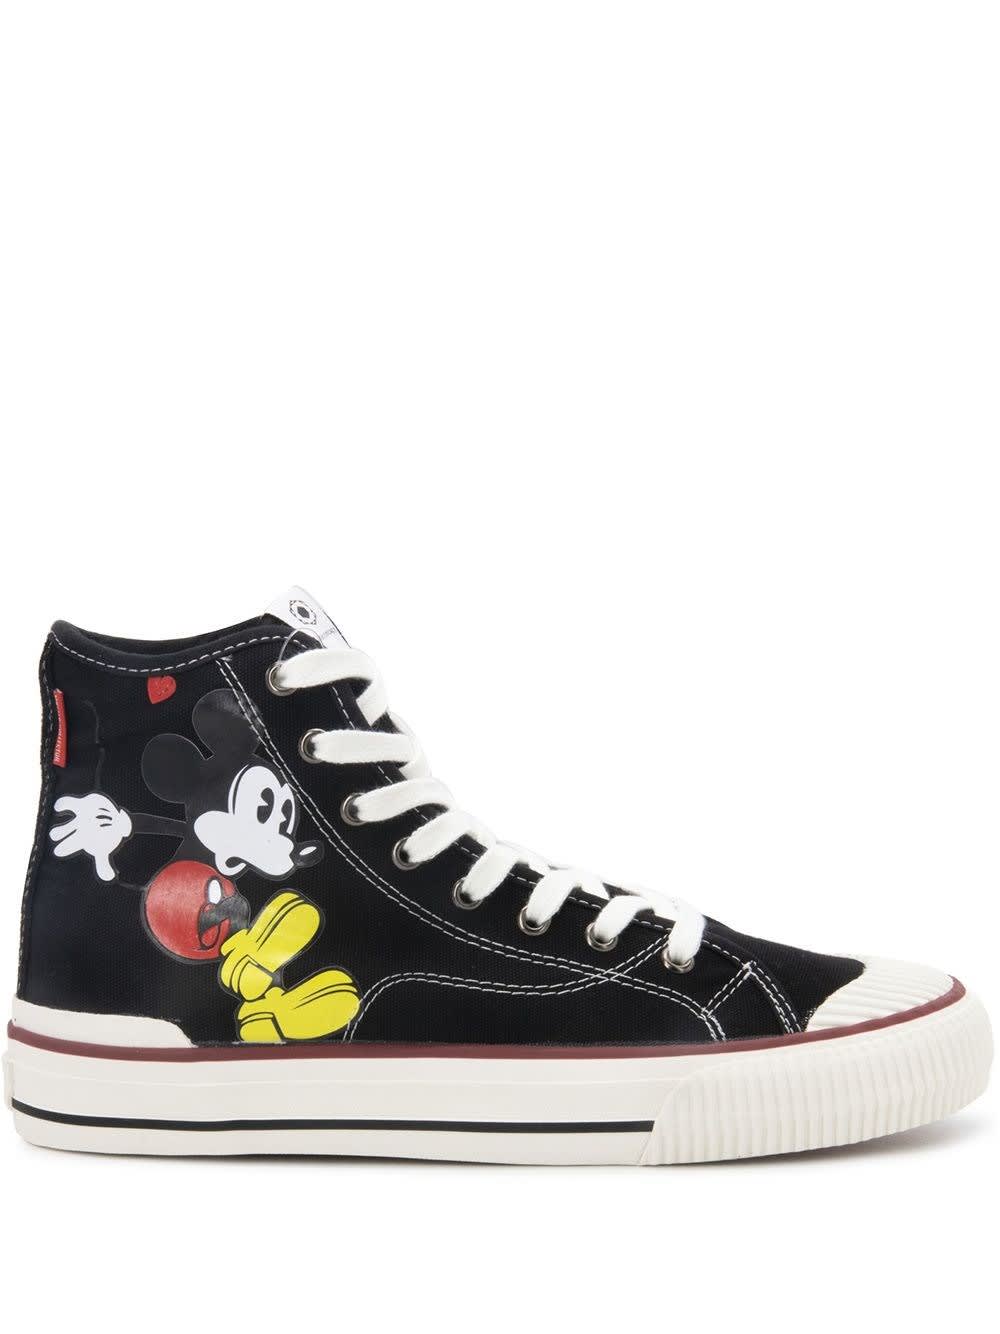 MOA MASTER OF ARTS MICKEY MOUSE SNEAKERS,MD636BLACK